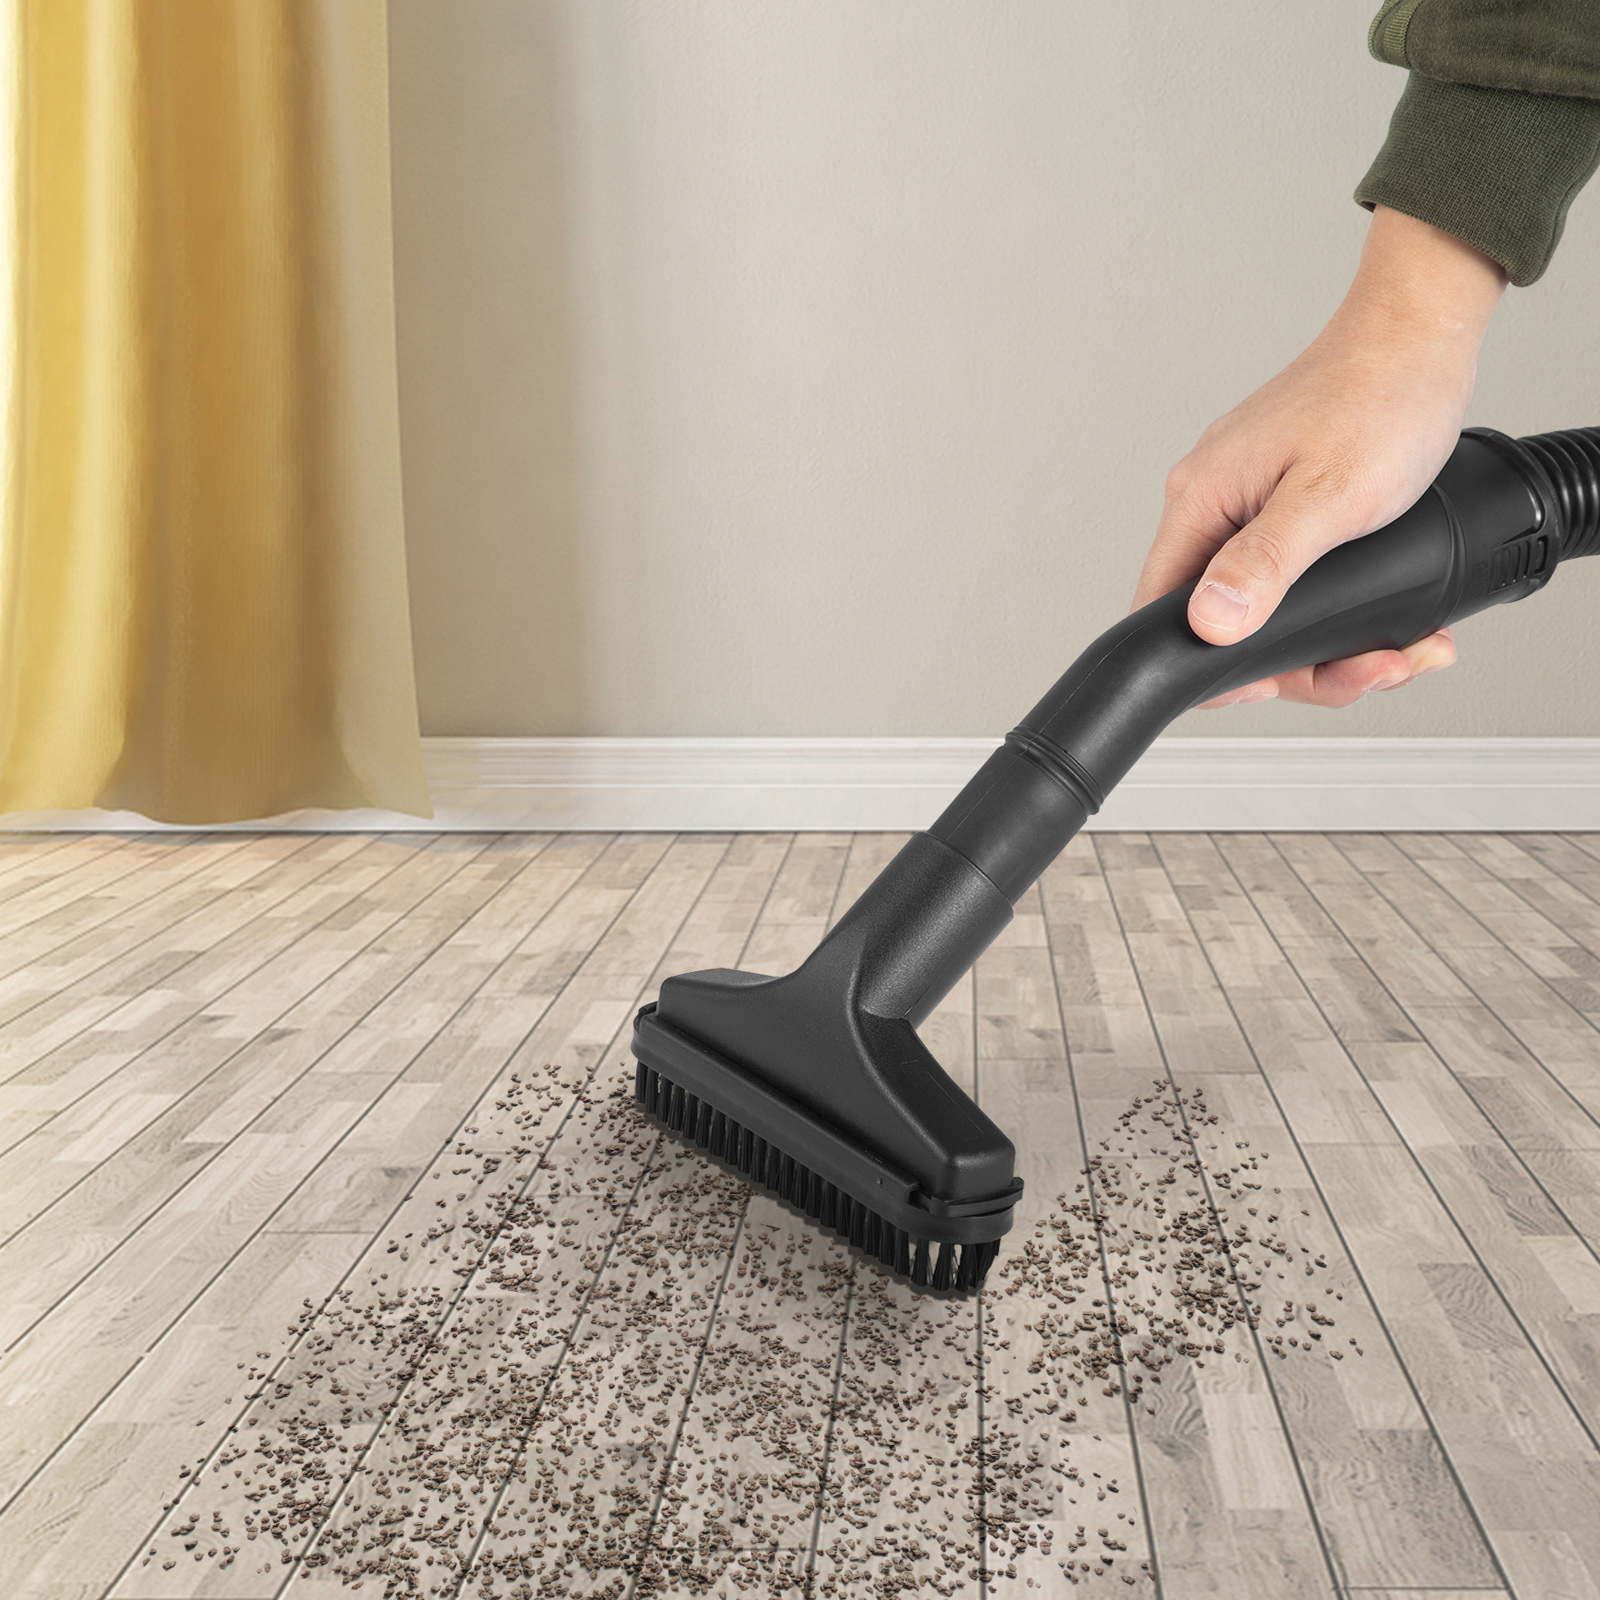  VEVOR Shop Vacuum Wet and Dry, 5 Gallon 6 Peak HP Wet/Dry Vac,  Powerful Suction with Blower Function with Attachments 2-in-1 Crevice  Nozzle, Small Shop Vac Perfect for Carpet Debris, Pet